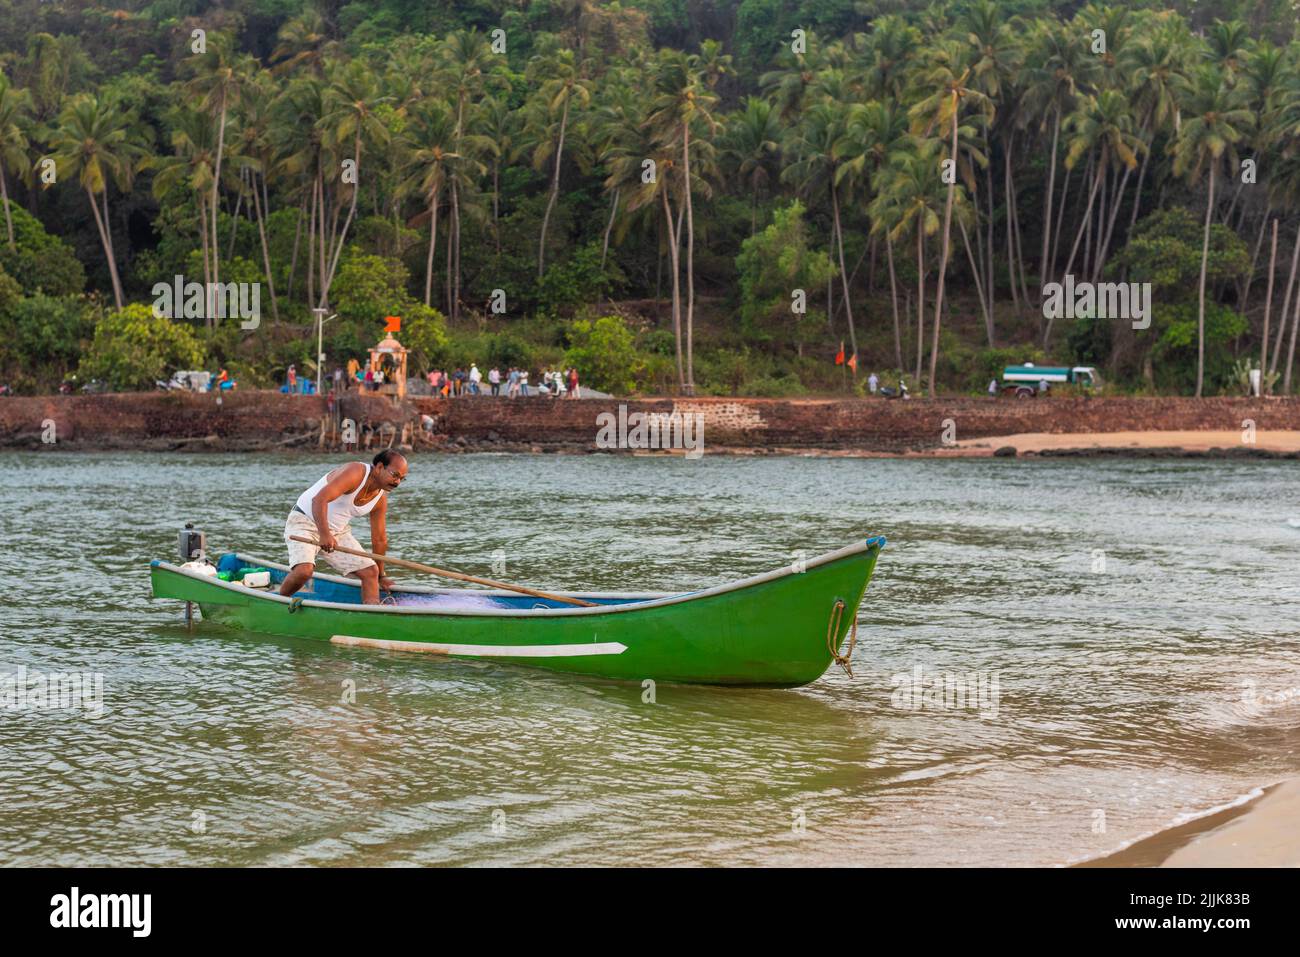 A local Indian fisherman in a boat in the village of Betul, Salcete, Goa, India Stock Photo